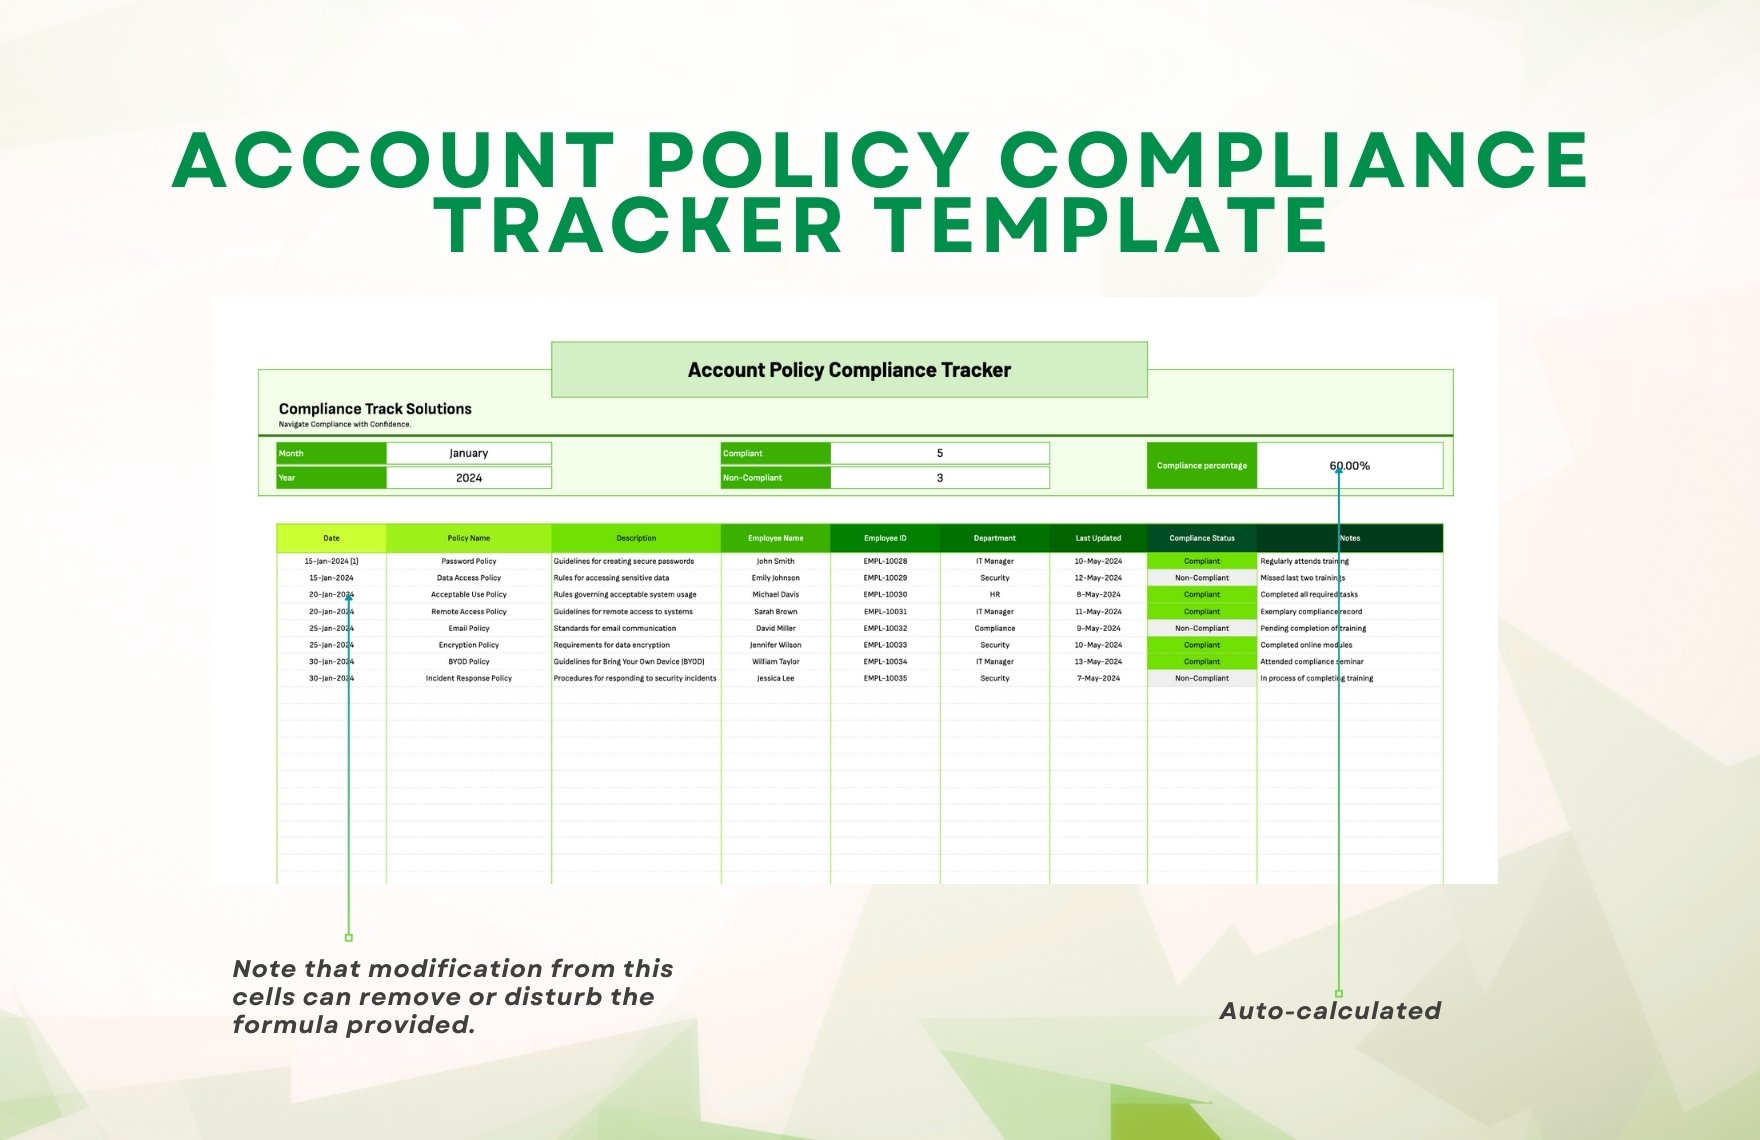 Account Policy Compliance Tracker Template